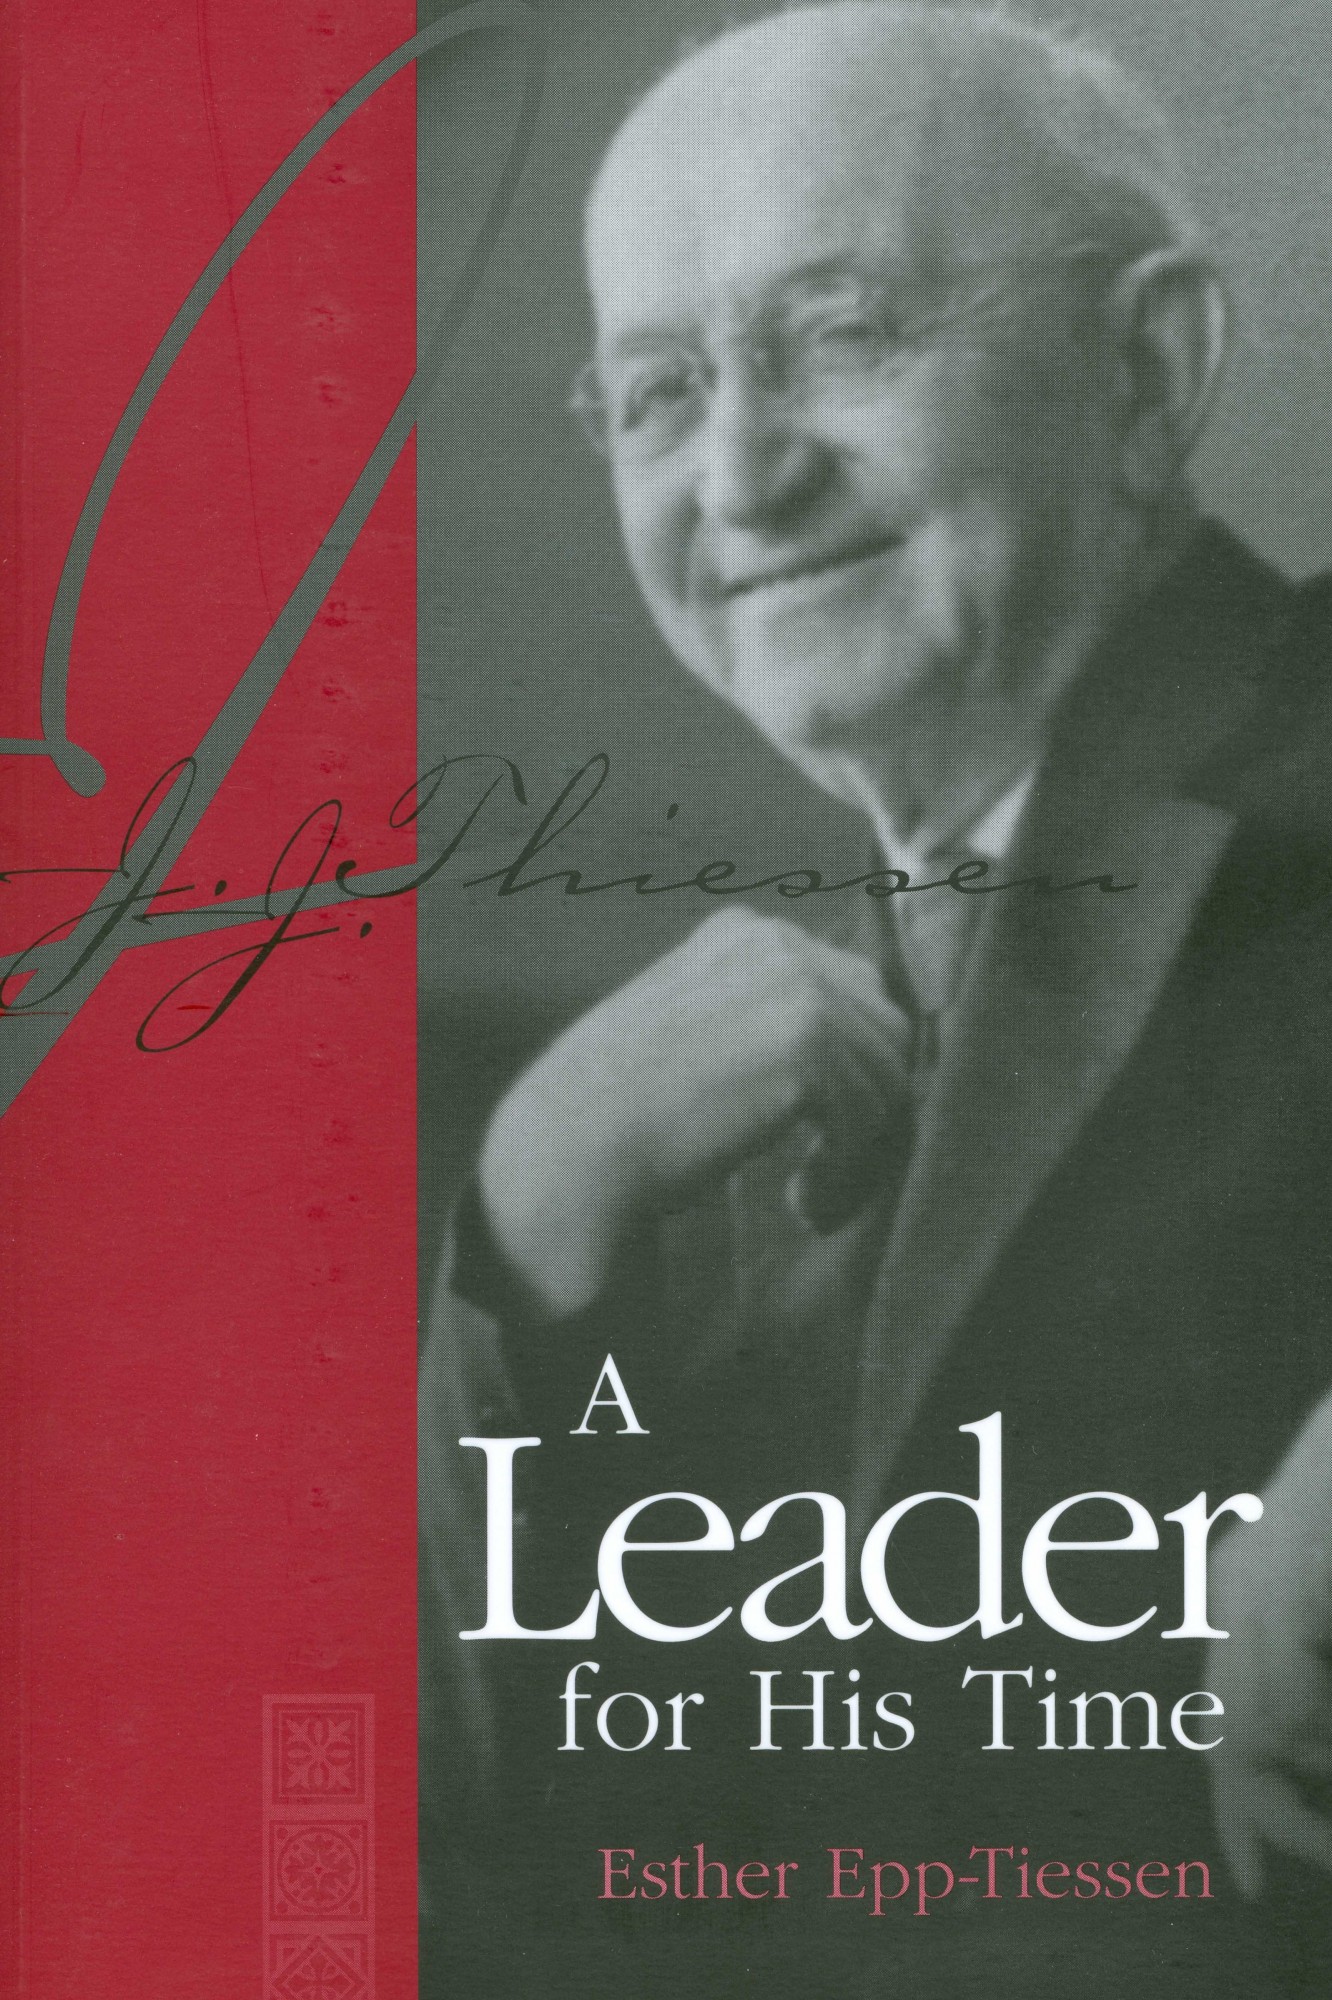 J. J. Thiessen: A Leader for His Time